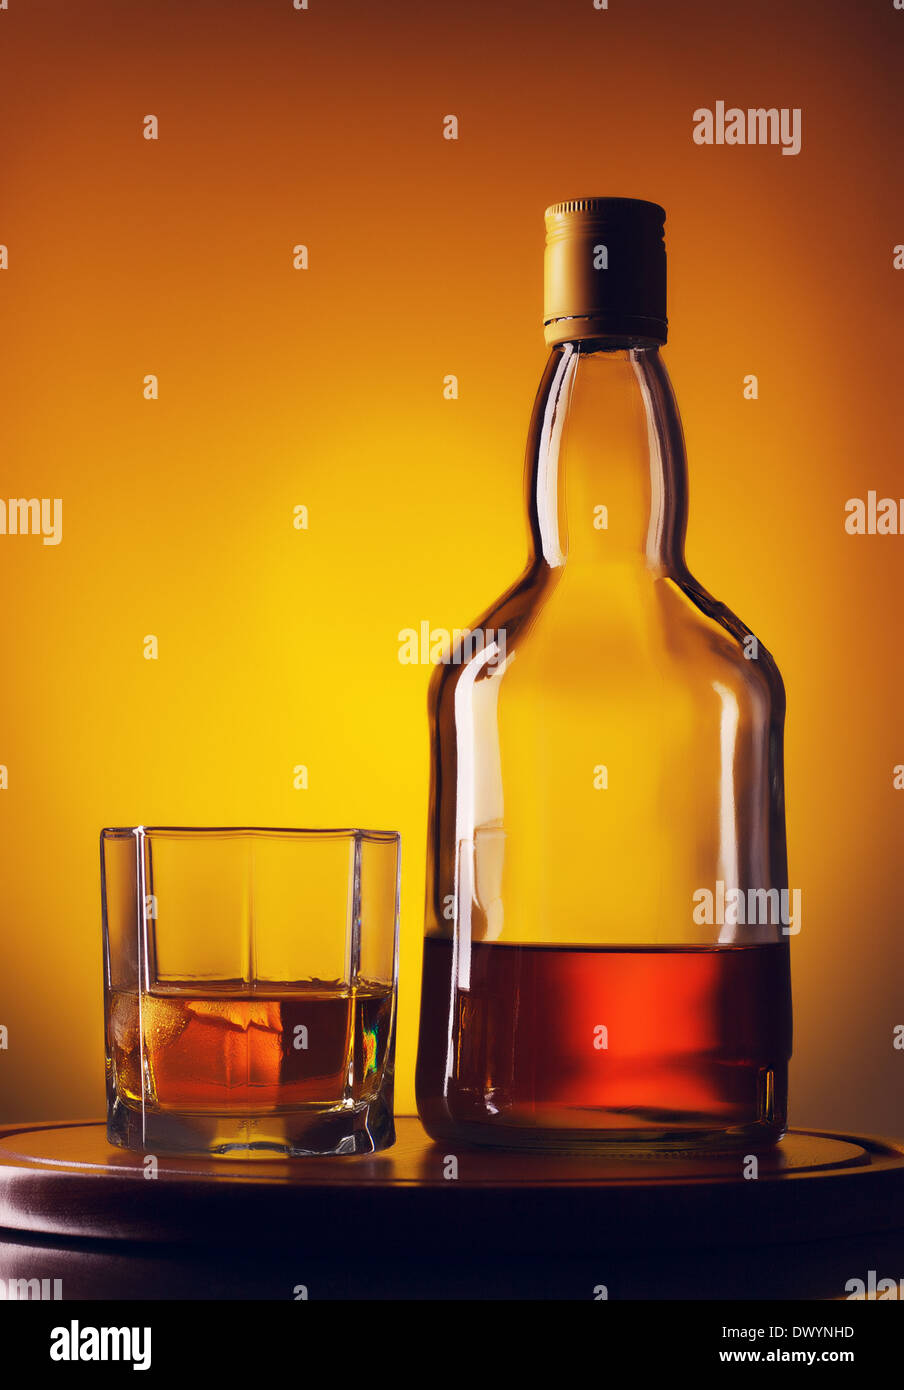 Download Glass And Bottle Of Whiskey On A Yellow Background Stock Photo Alamy Yellowimages Mockups